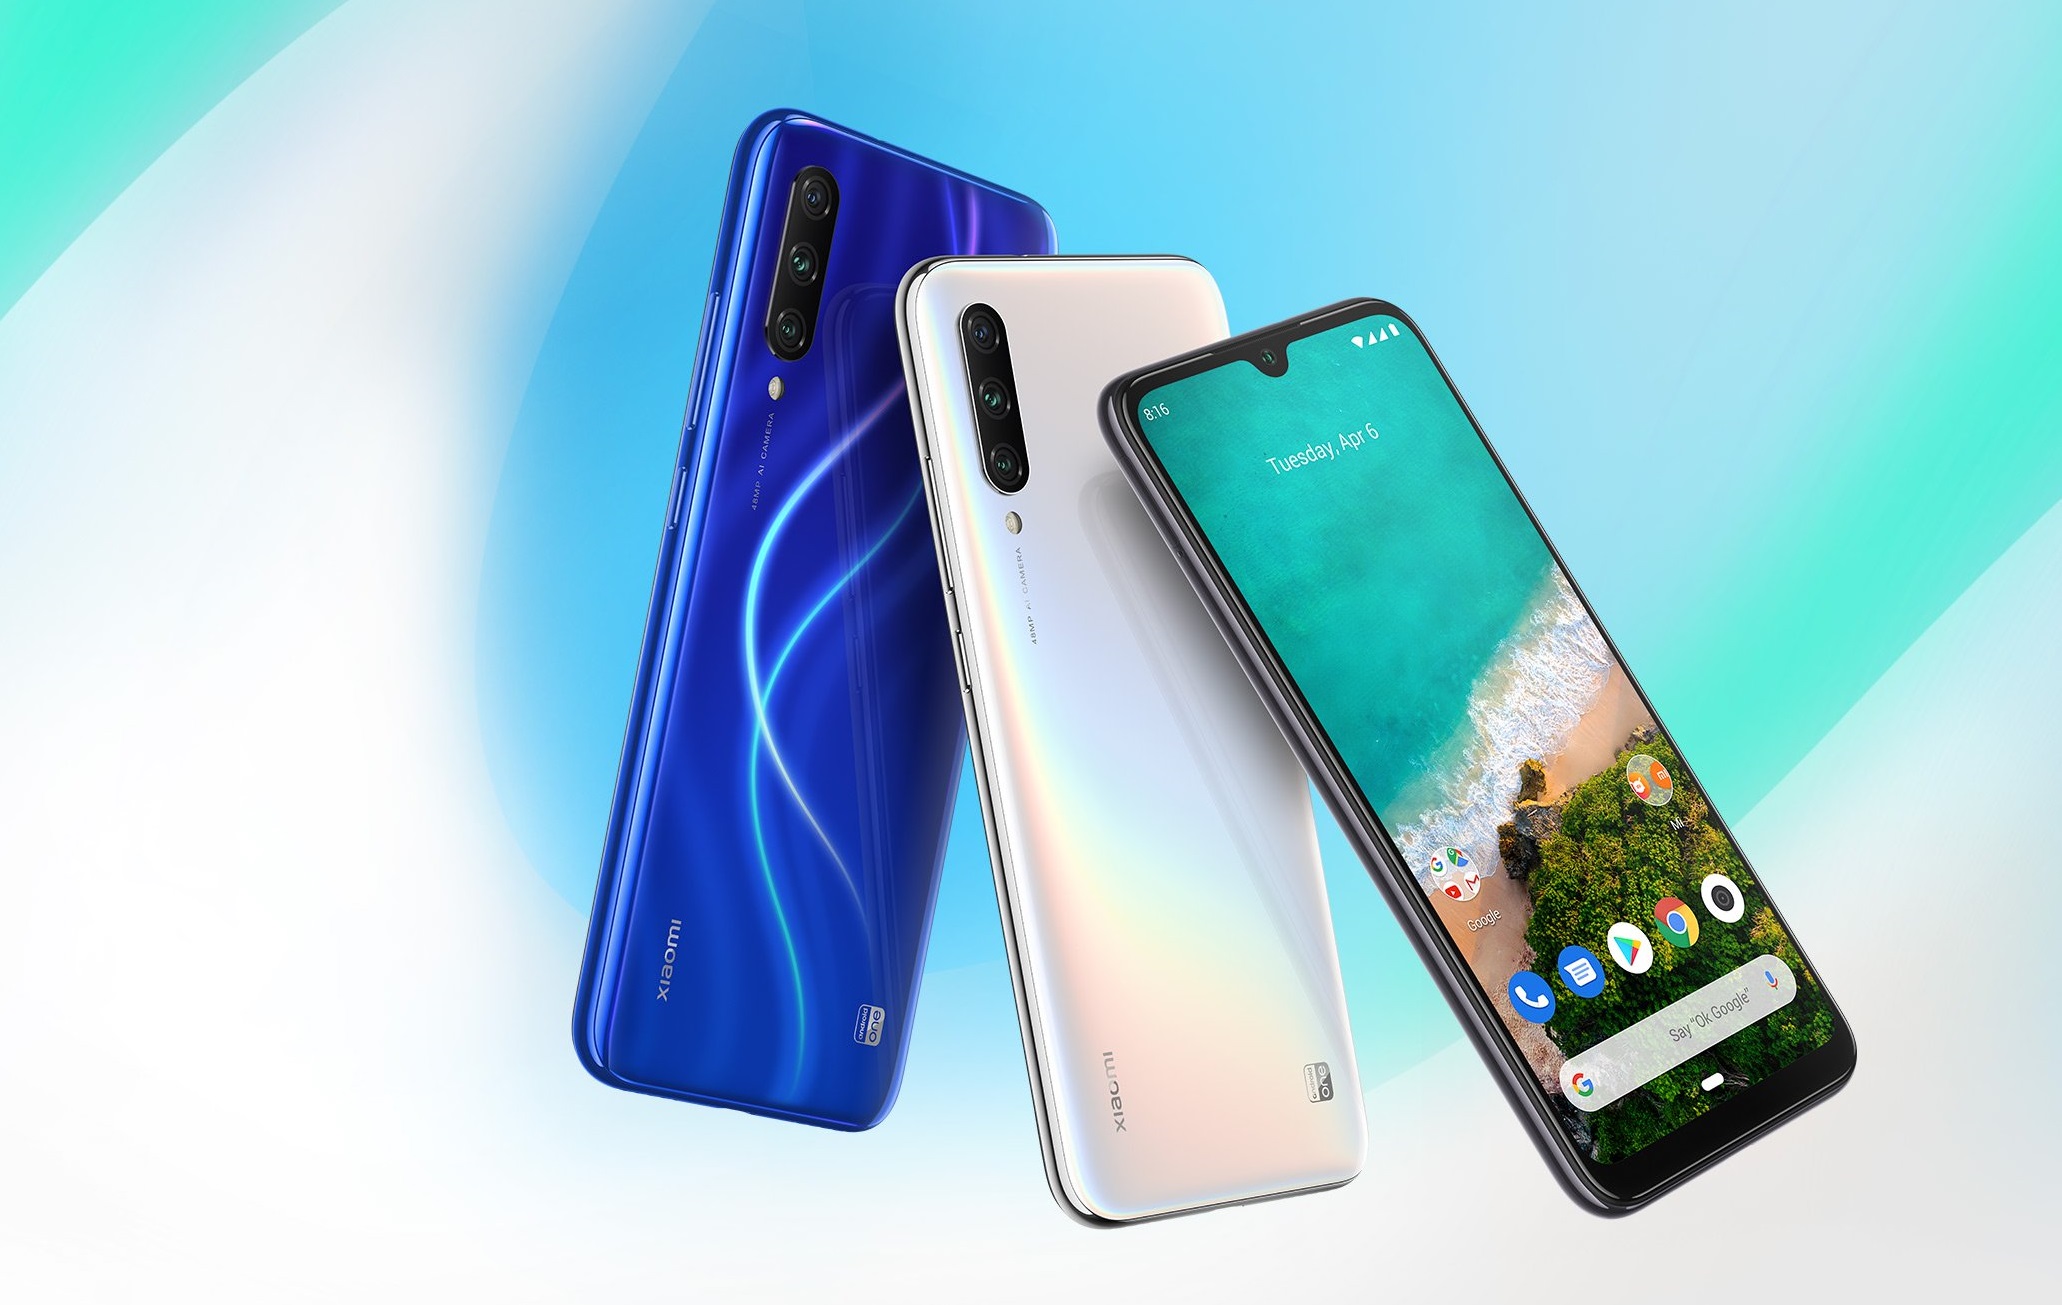 Xiaomi Mi A3 unexpectedly received a big global update to Android 11